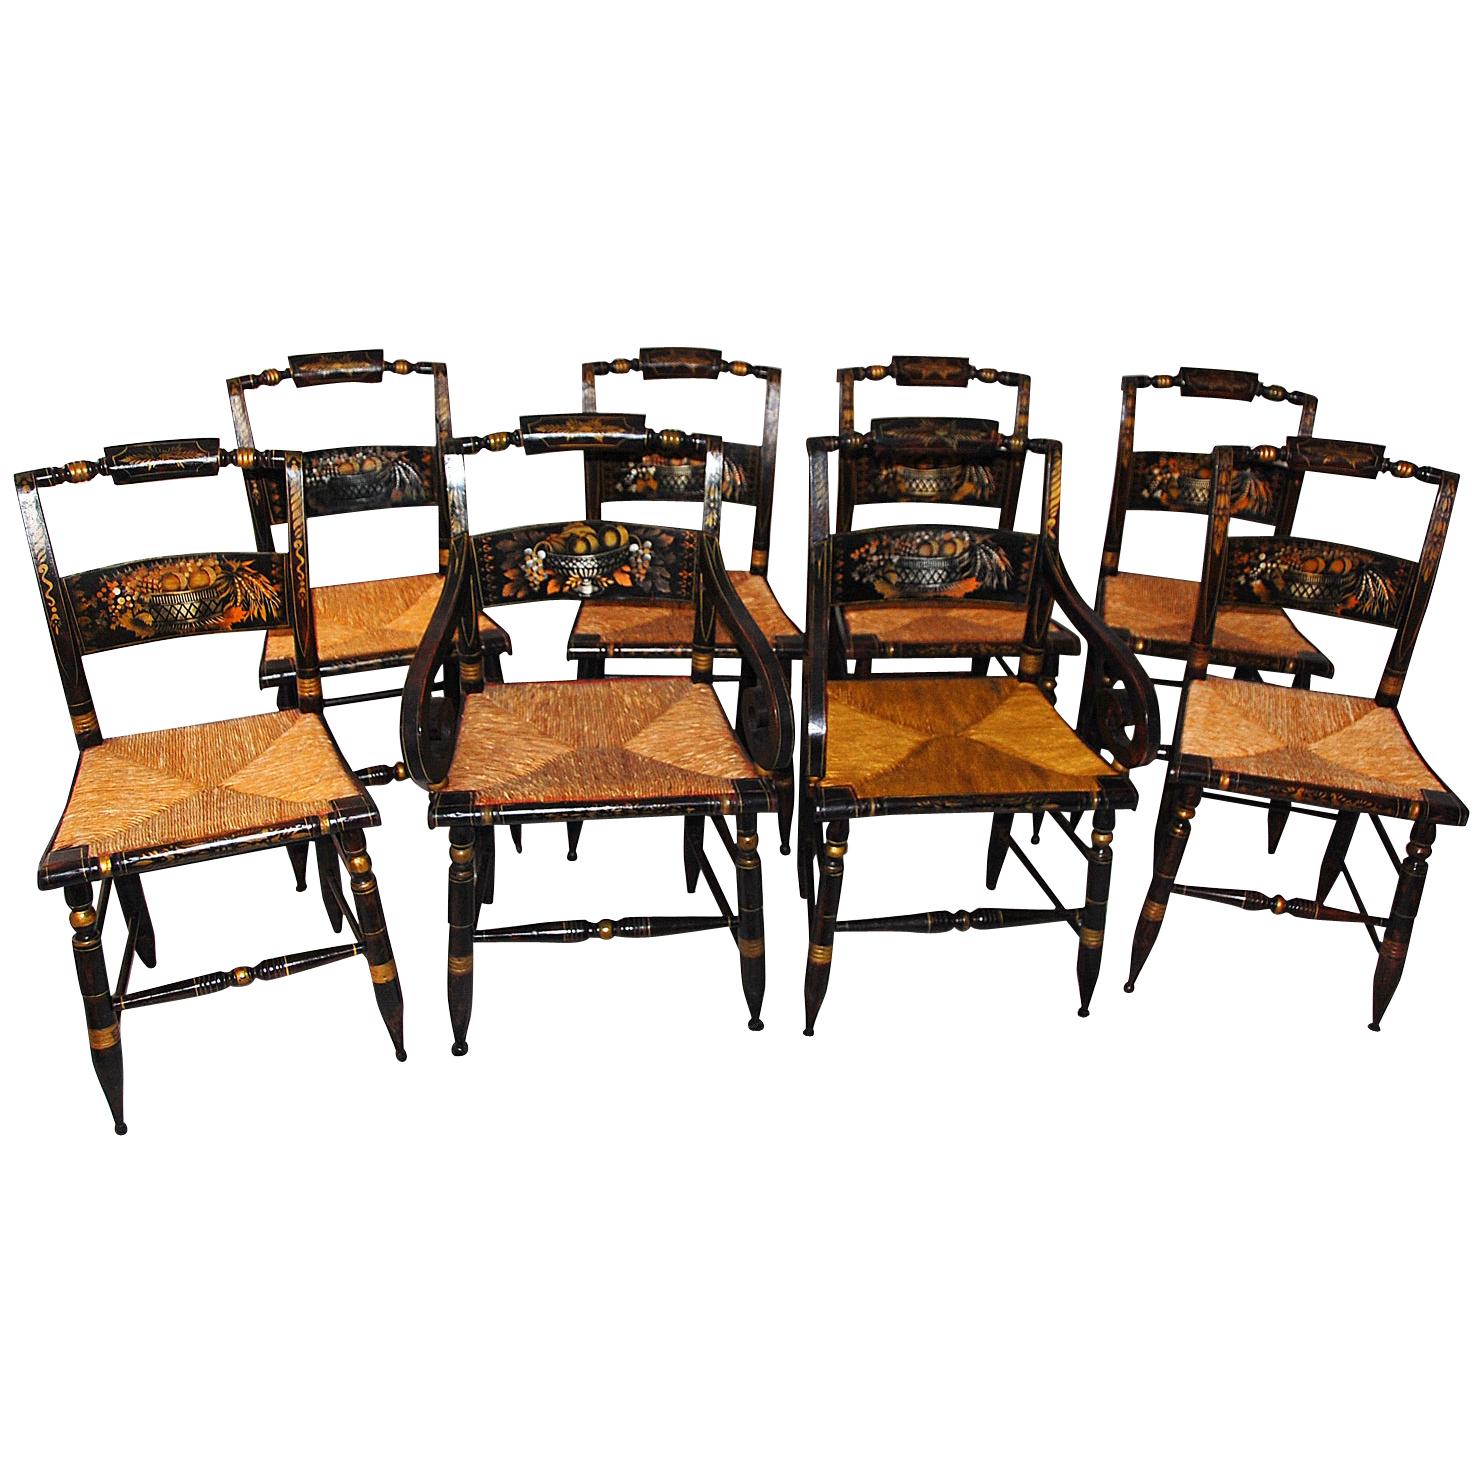 American 19th Century Hitchcock Chairs, Set of 8 Including Two Arms, Six Sides